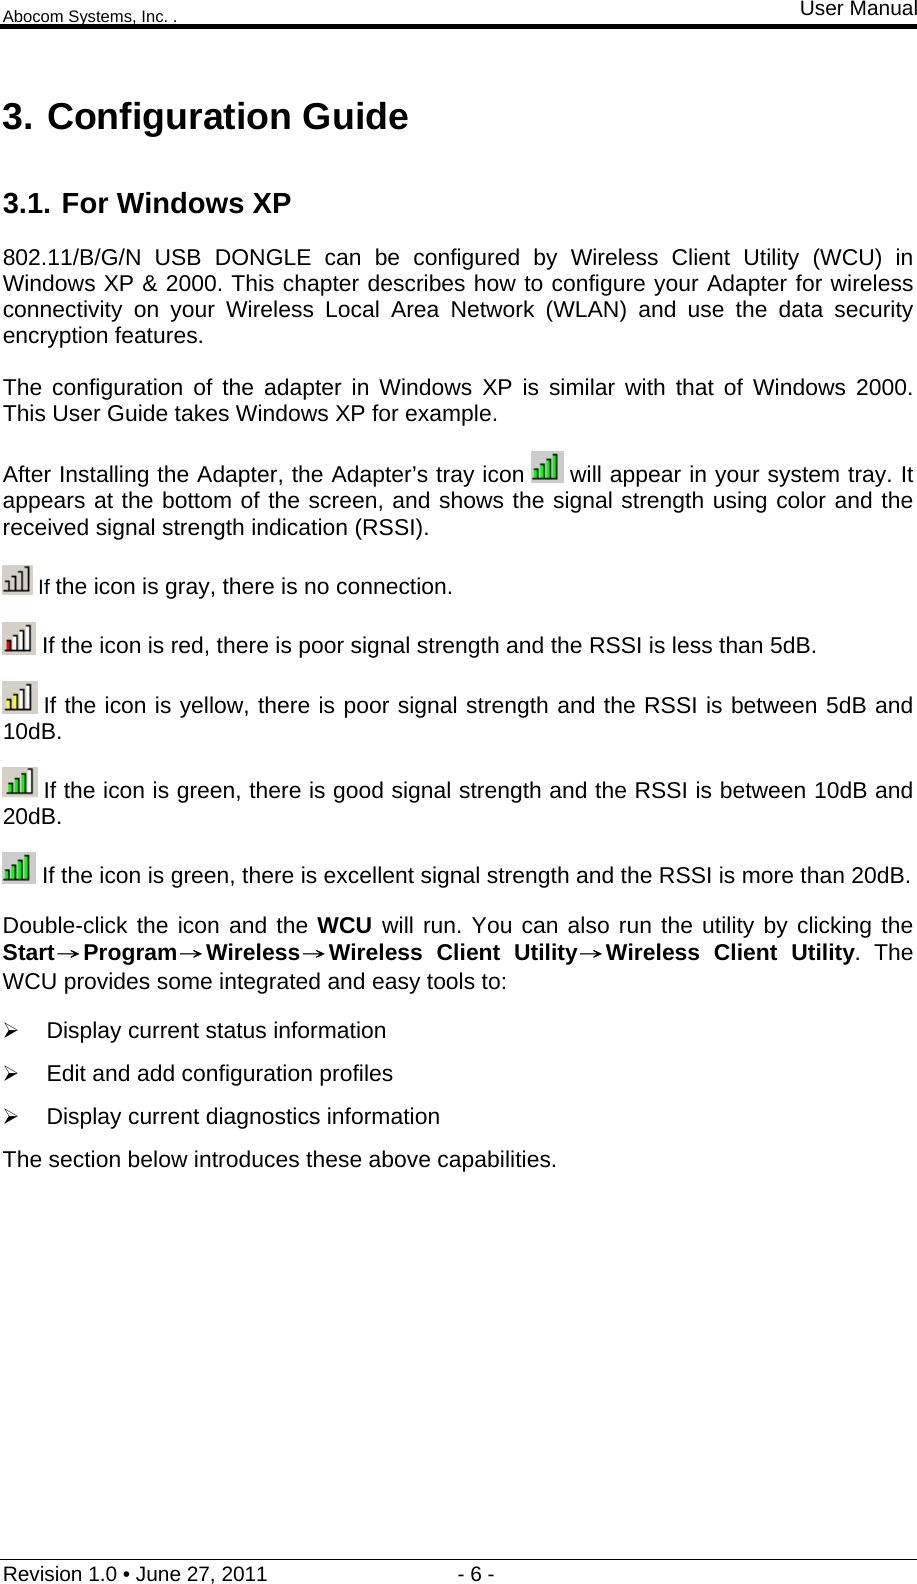 Abocom Systems, Inc. . User Manual Revision 1.0 • June 27, 2011                                 - 6 -                                                                3. Configuration Guide 3.1. For Windows XP 802.11/B/G/N USB DONGLE can be configured by Wireless Client Utility (WCU) in Windows XP &amp; 2000. This chapter describes how to configure your Adapter for wireless connectivity on your Wireless Local Area Network (WLAN) and use the data security encryption features.  The configuration of the adapter in Windows XP is similar with that of Windows 2000. This User Guide takes Windows XP for example. After Installing the Adapter, the Adapter’s tray icon   will appear in your system tray. It appears at the bottom of the screen, and shows the signal strength using color and the received signal strength indication (RSSI).  If the icon is gray, there is no connection.  If the icon is red, there is poor signal strength and the RSSI is less than 5dB.  If the icon is yellow, there is poor signal strength and the RSSI is between 5dB and 10dB.  If the icon is green, there is good signal strength and the RSSI is between 10dB and 20dB.  If the icon is green, there is excellent signal strength and the RSSI is more than 20dB. Double-click the icon and the WCU  will run. You can also run the utility by clicking the Start→Program→Wireless→30BWireless Client Utility→Wireless Client Utility. The WCU provides some integrated and easy tools to:  Display current status information  Edit and add configuration profiles  Display current diagnostics information The section below introduces these above capabilities.         